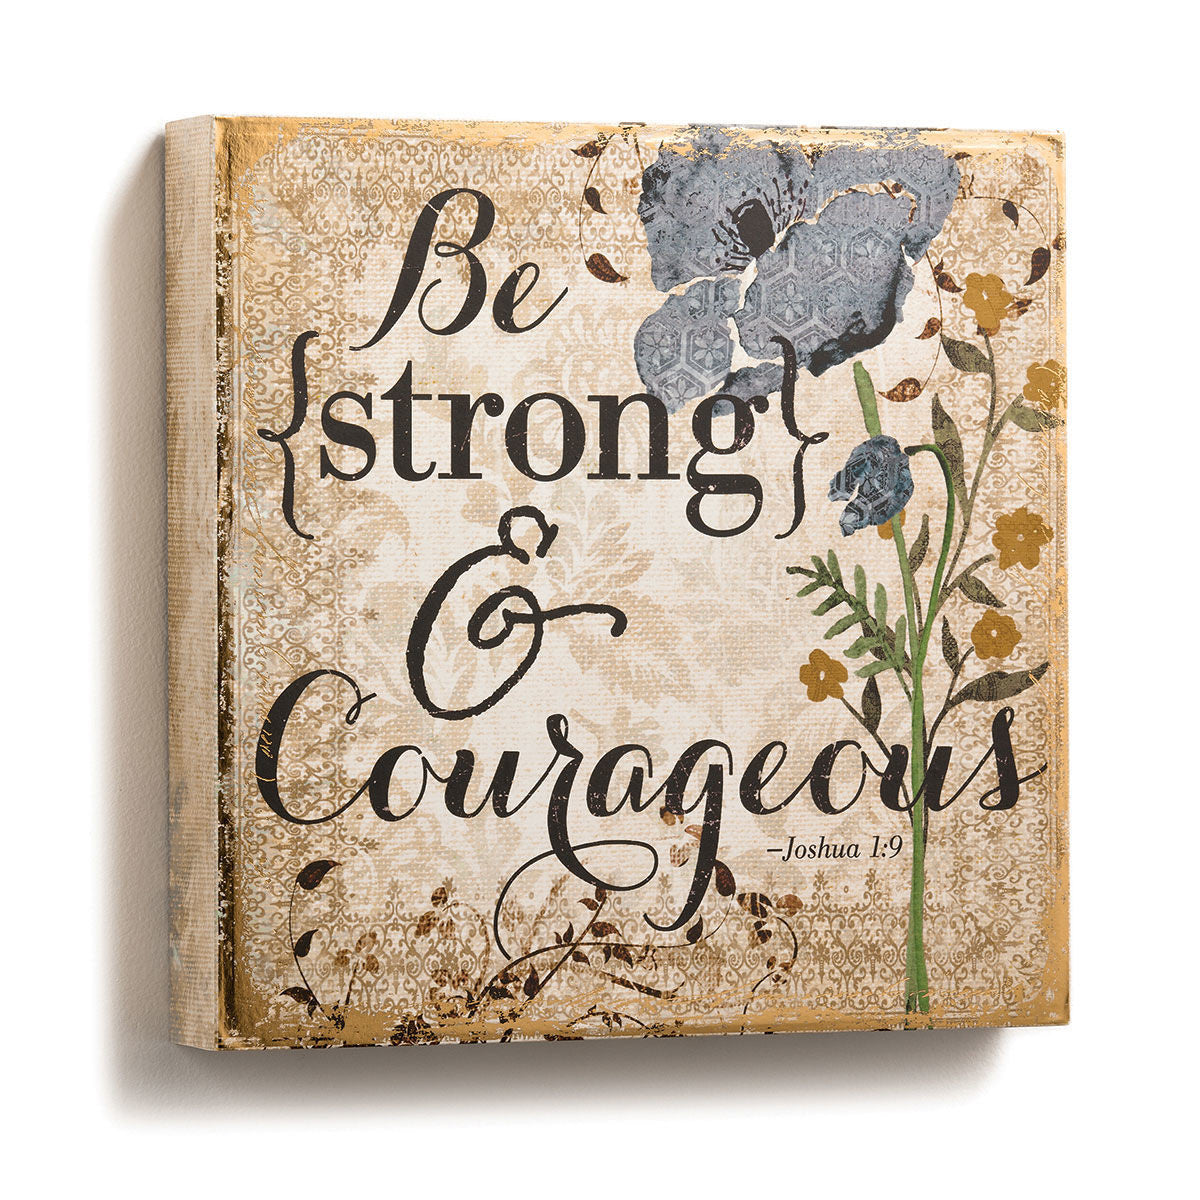 Be Strong & Courageous Wall Art